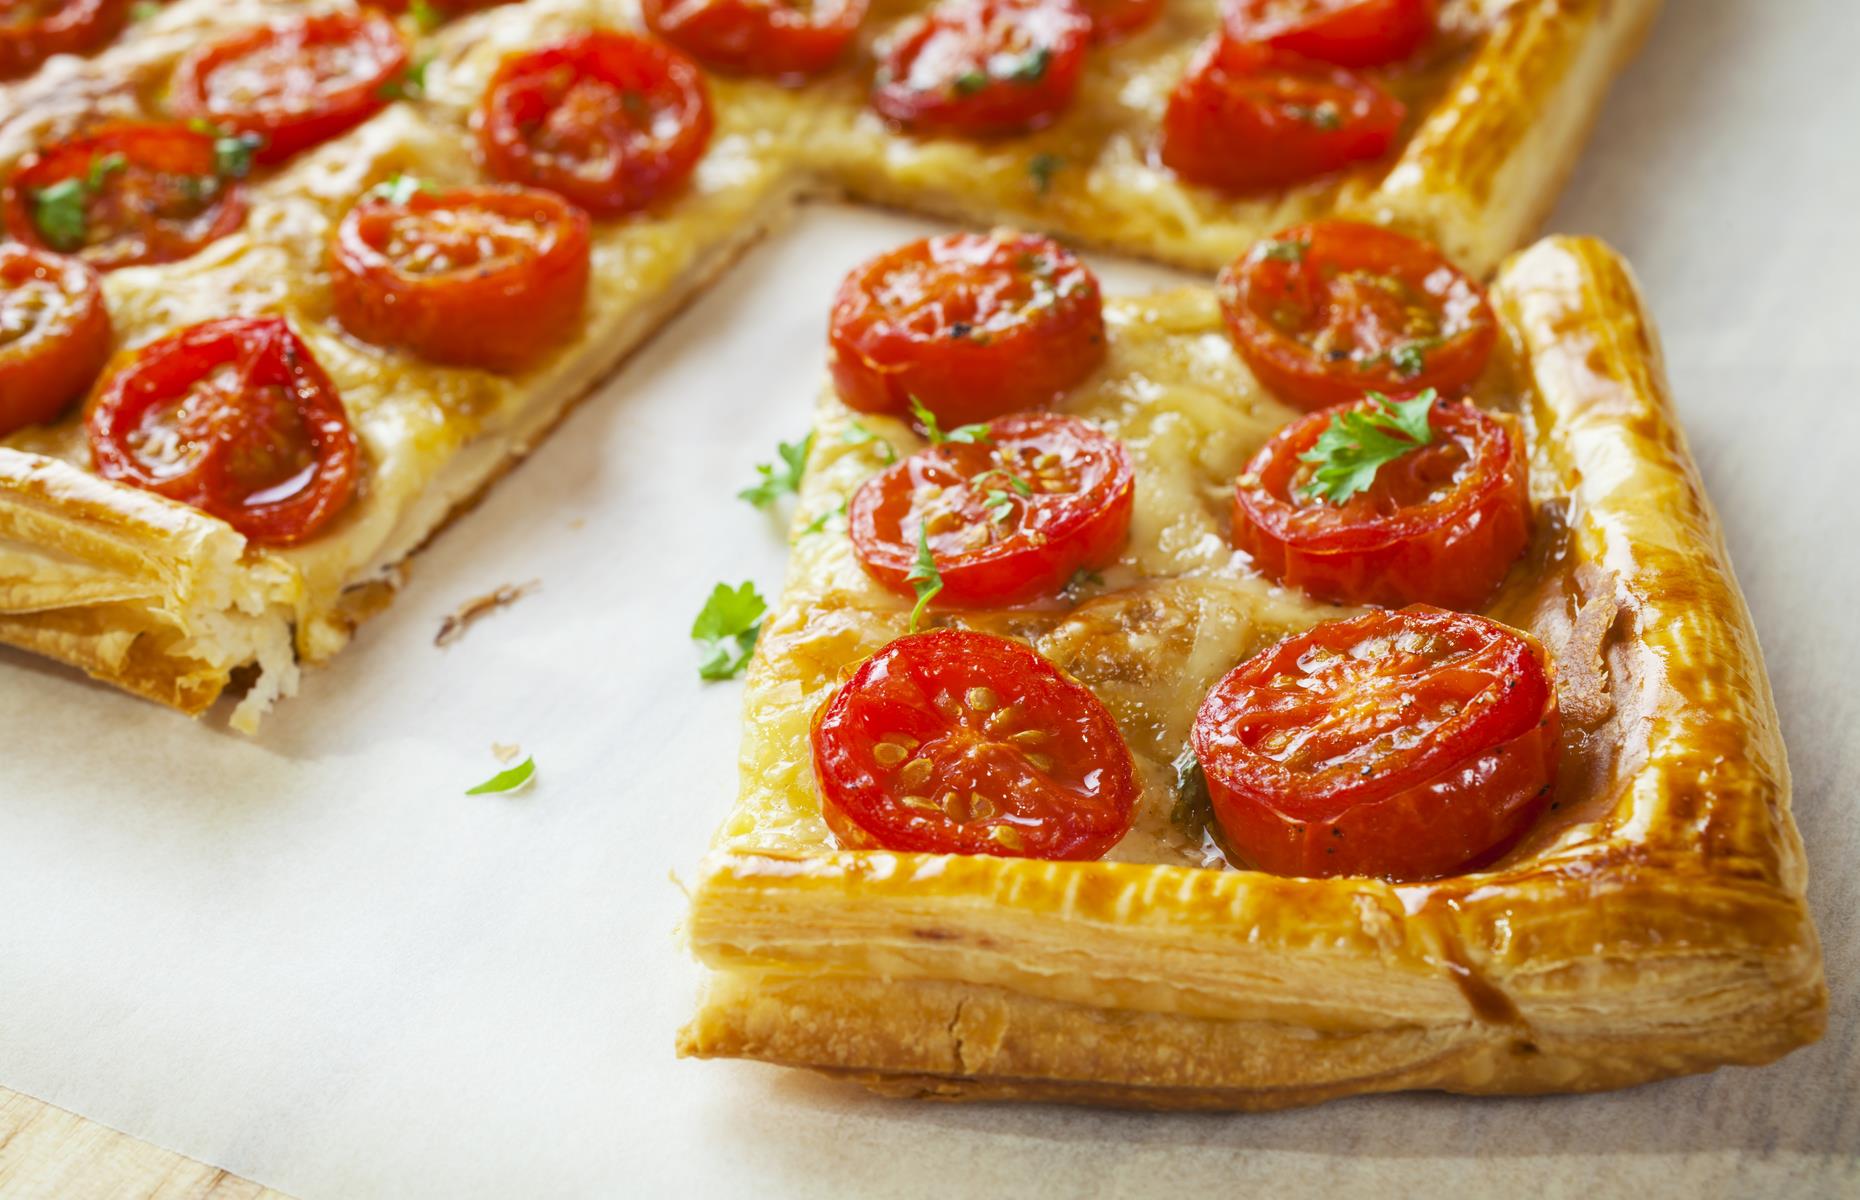 Use shop-bought puff pastry for a quick tart